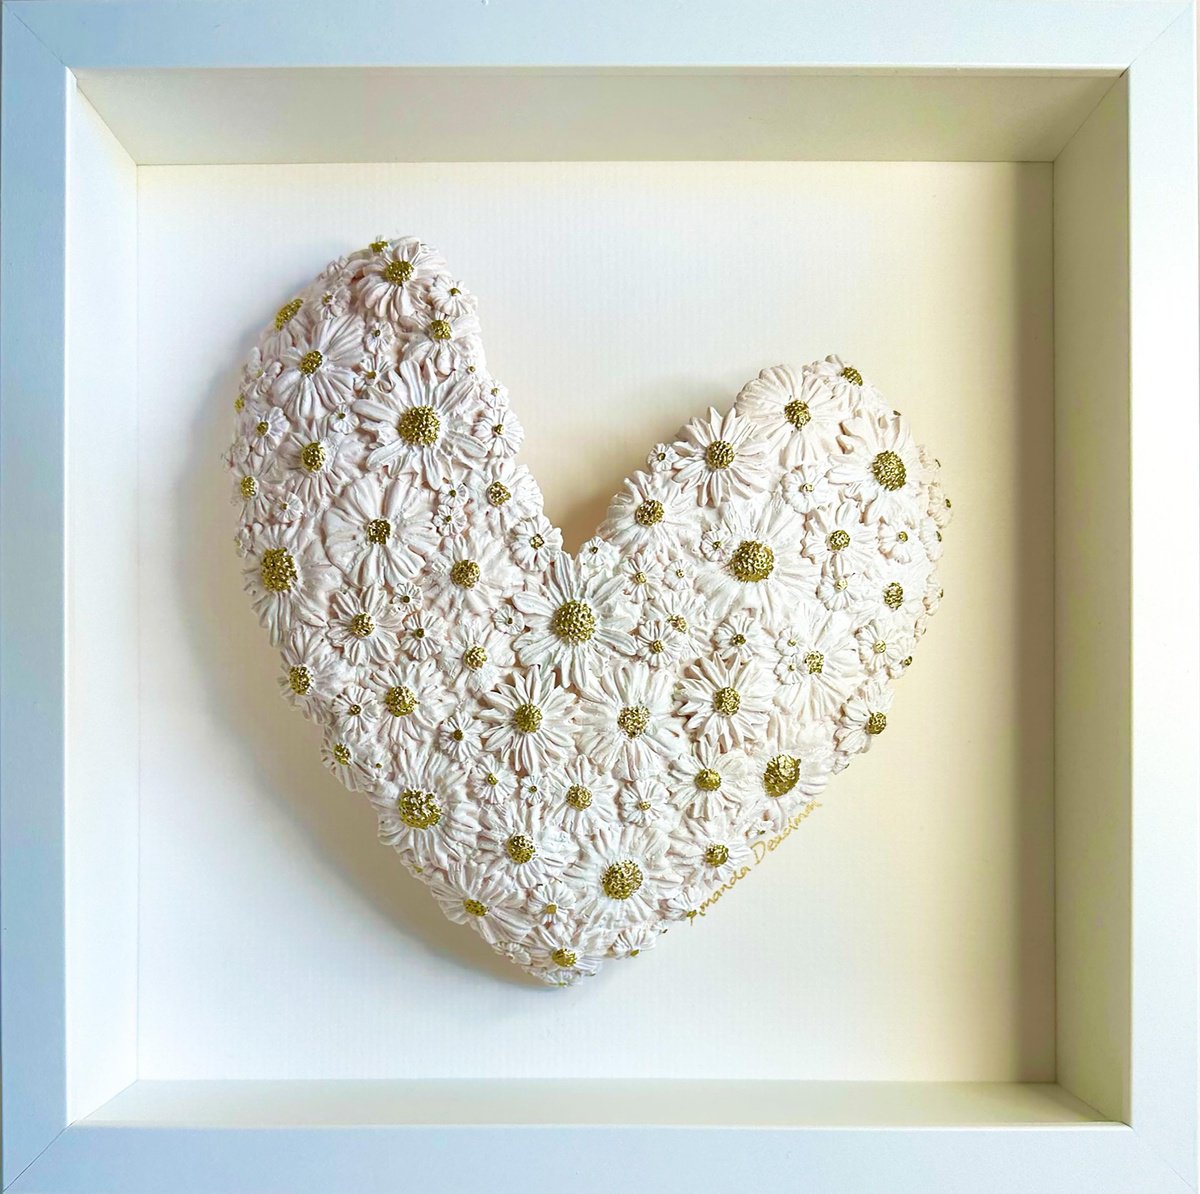 As Fresh as a Daisy (White polymer clay heart with gold) by Amanda Deadman